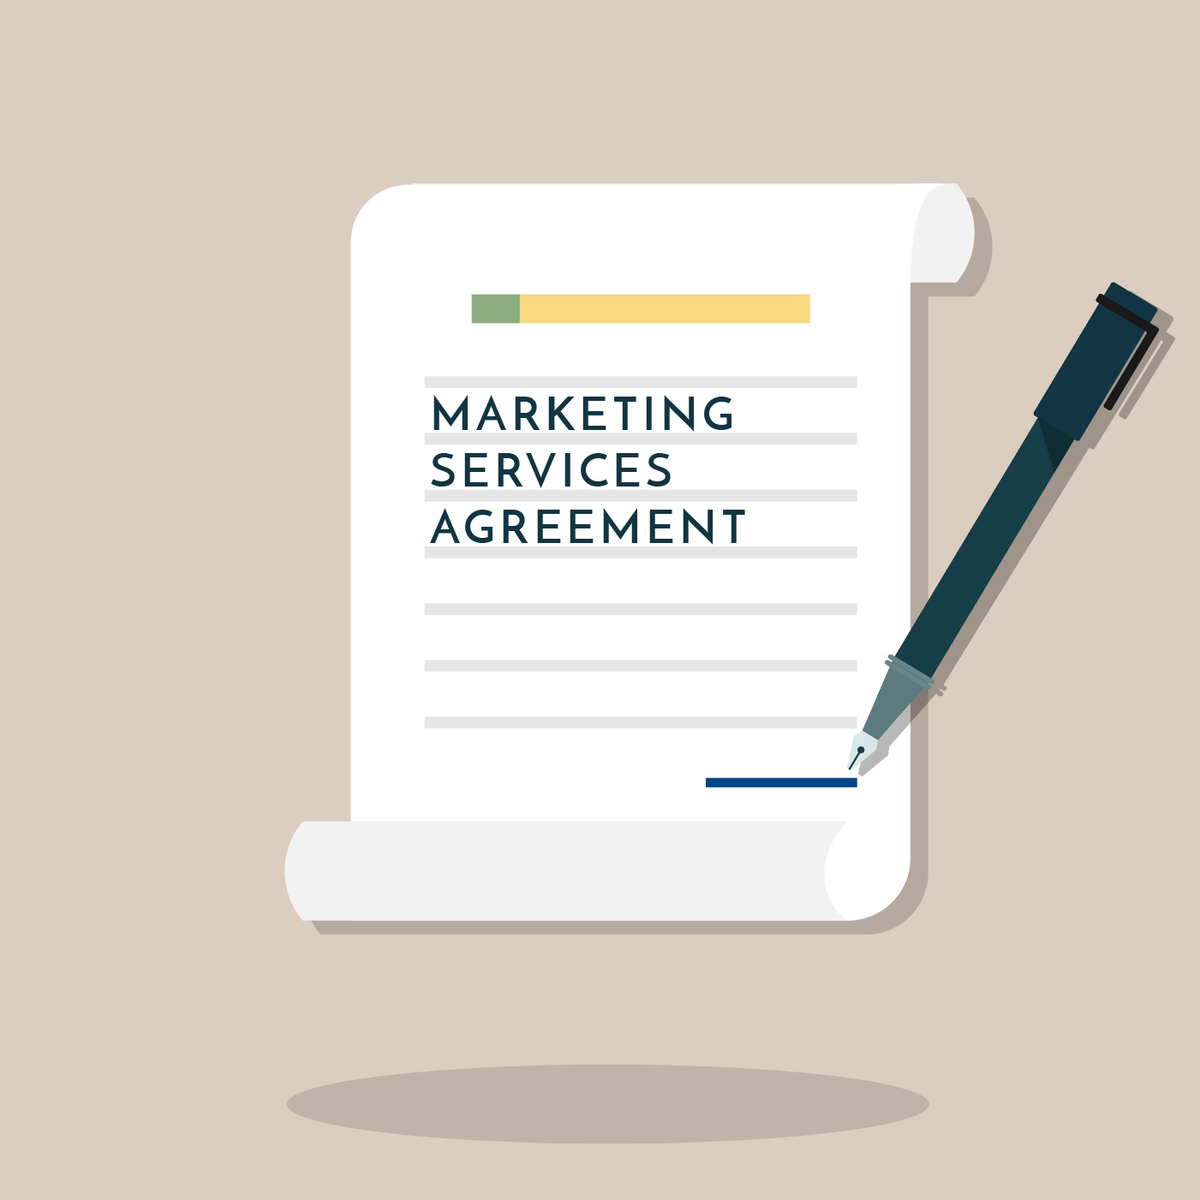 Marketing Services Agreement